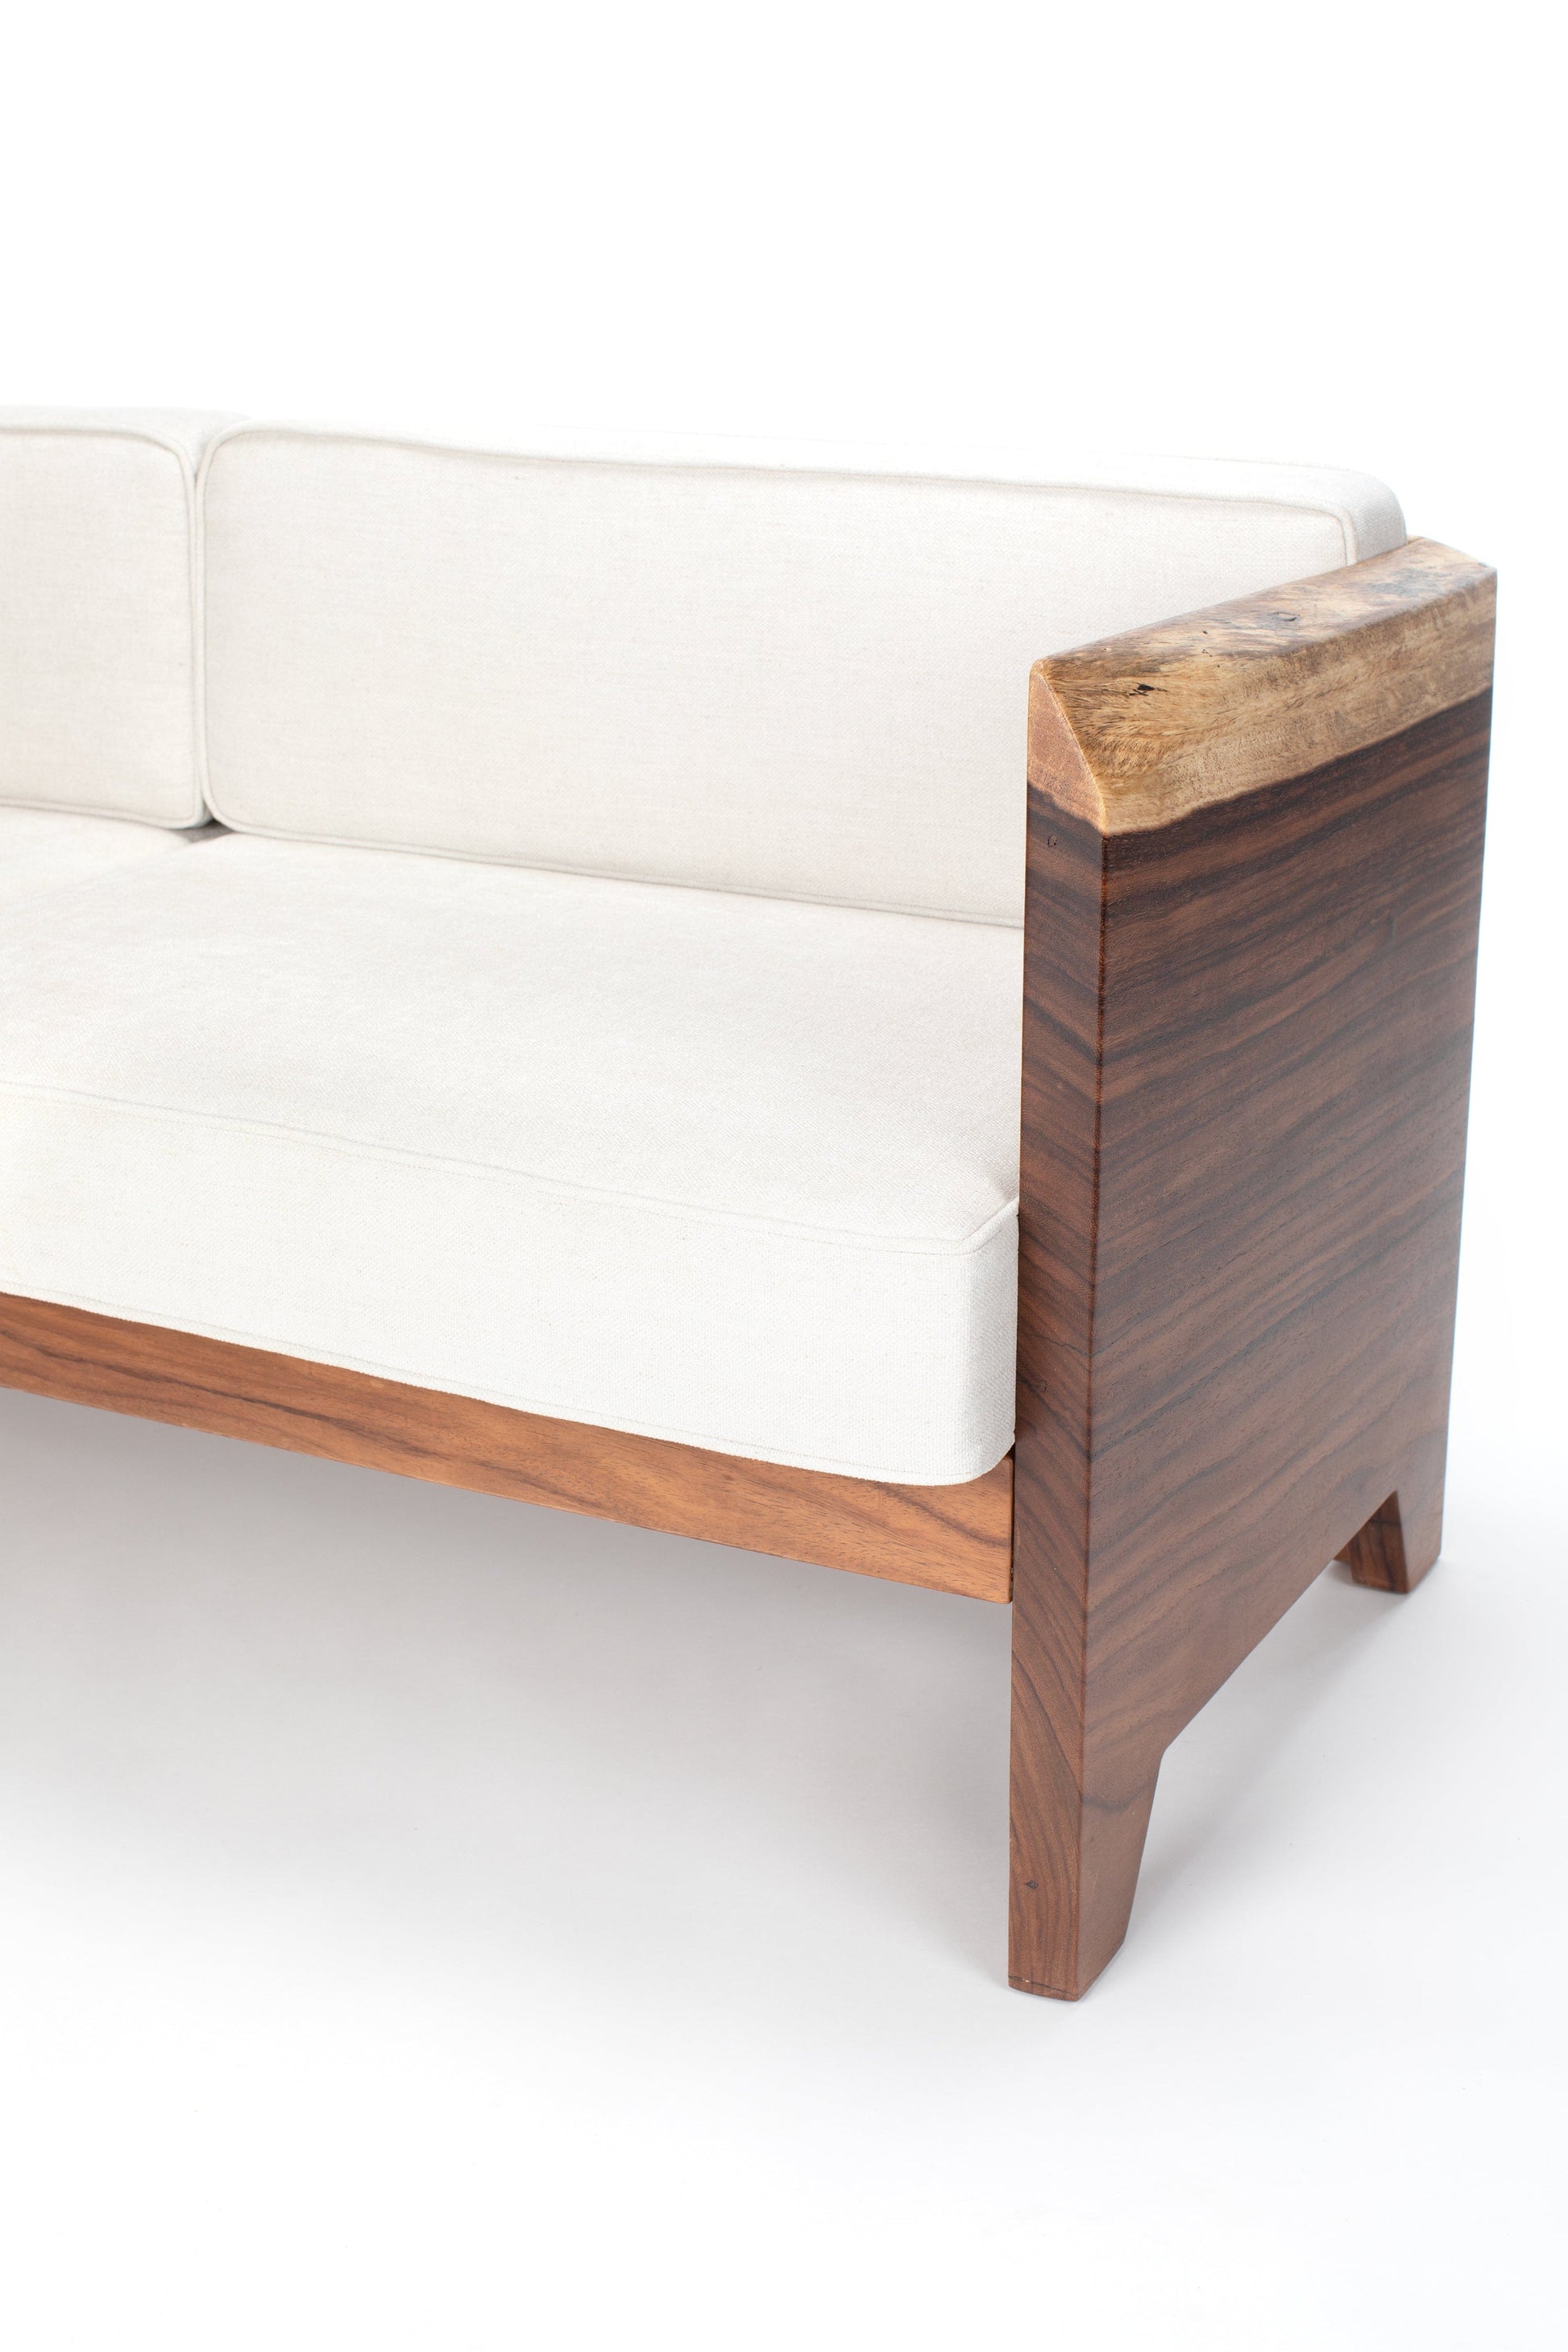 The Carpentry Shop Co., LLC Carpentry & Woodworking The Alexandra Couch